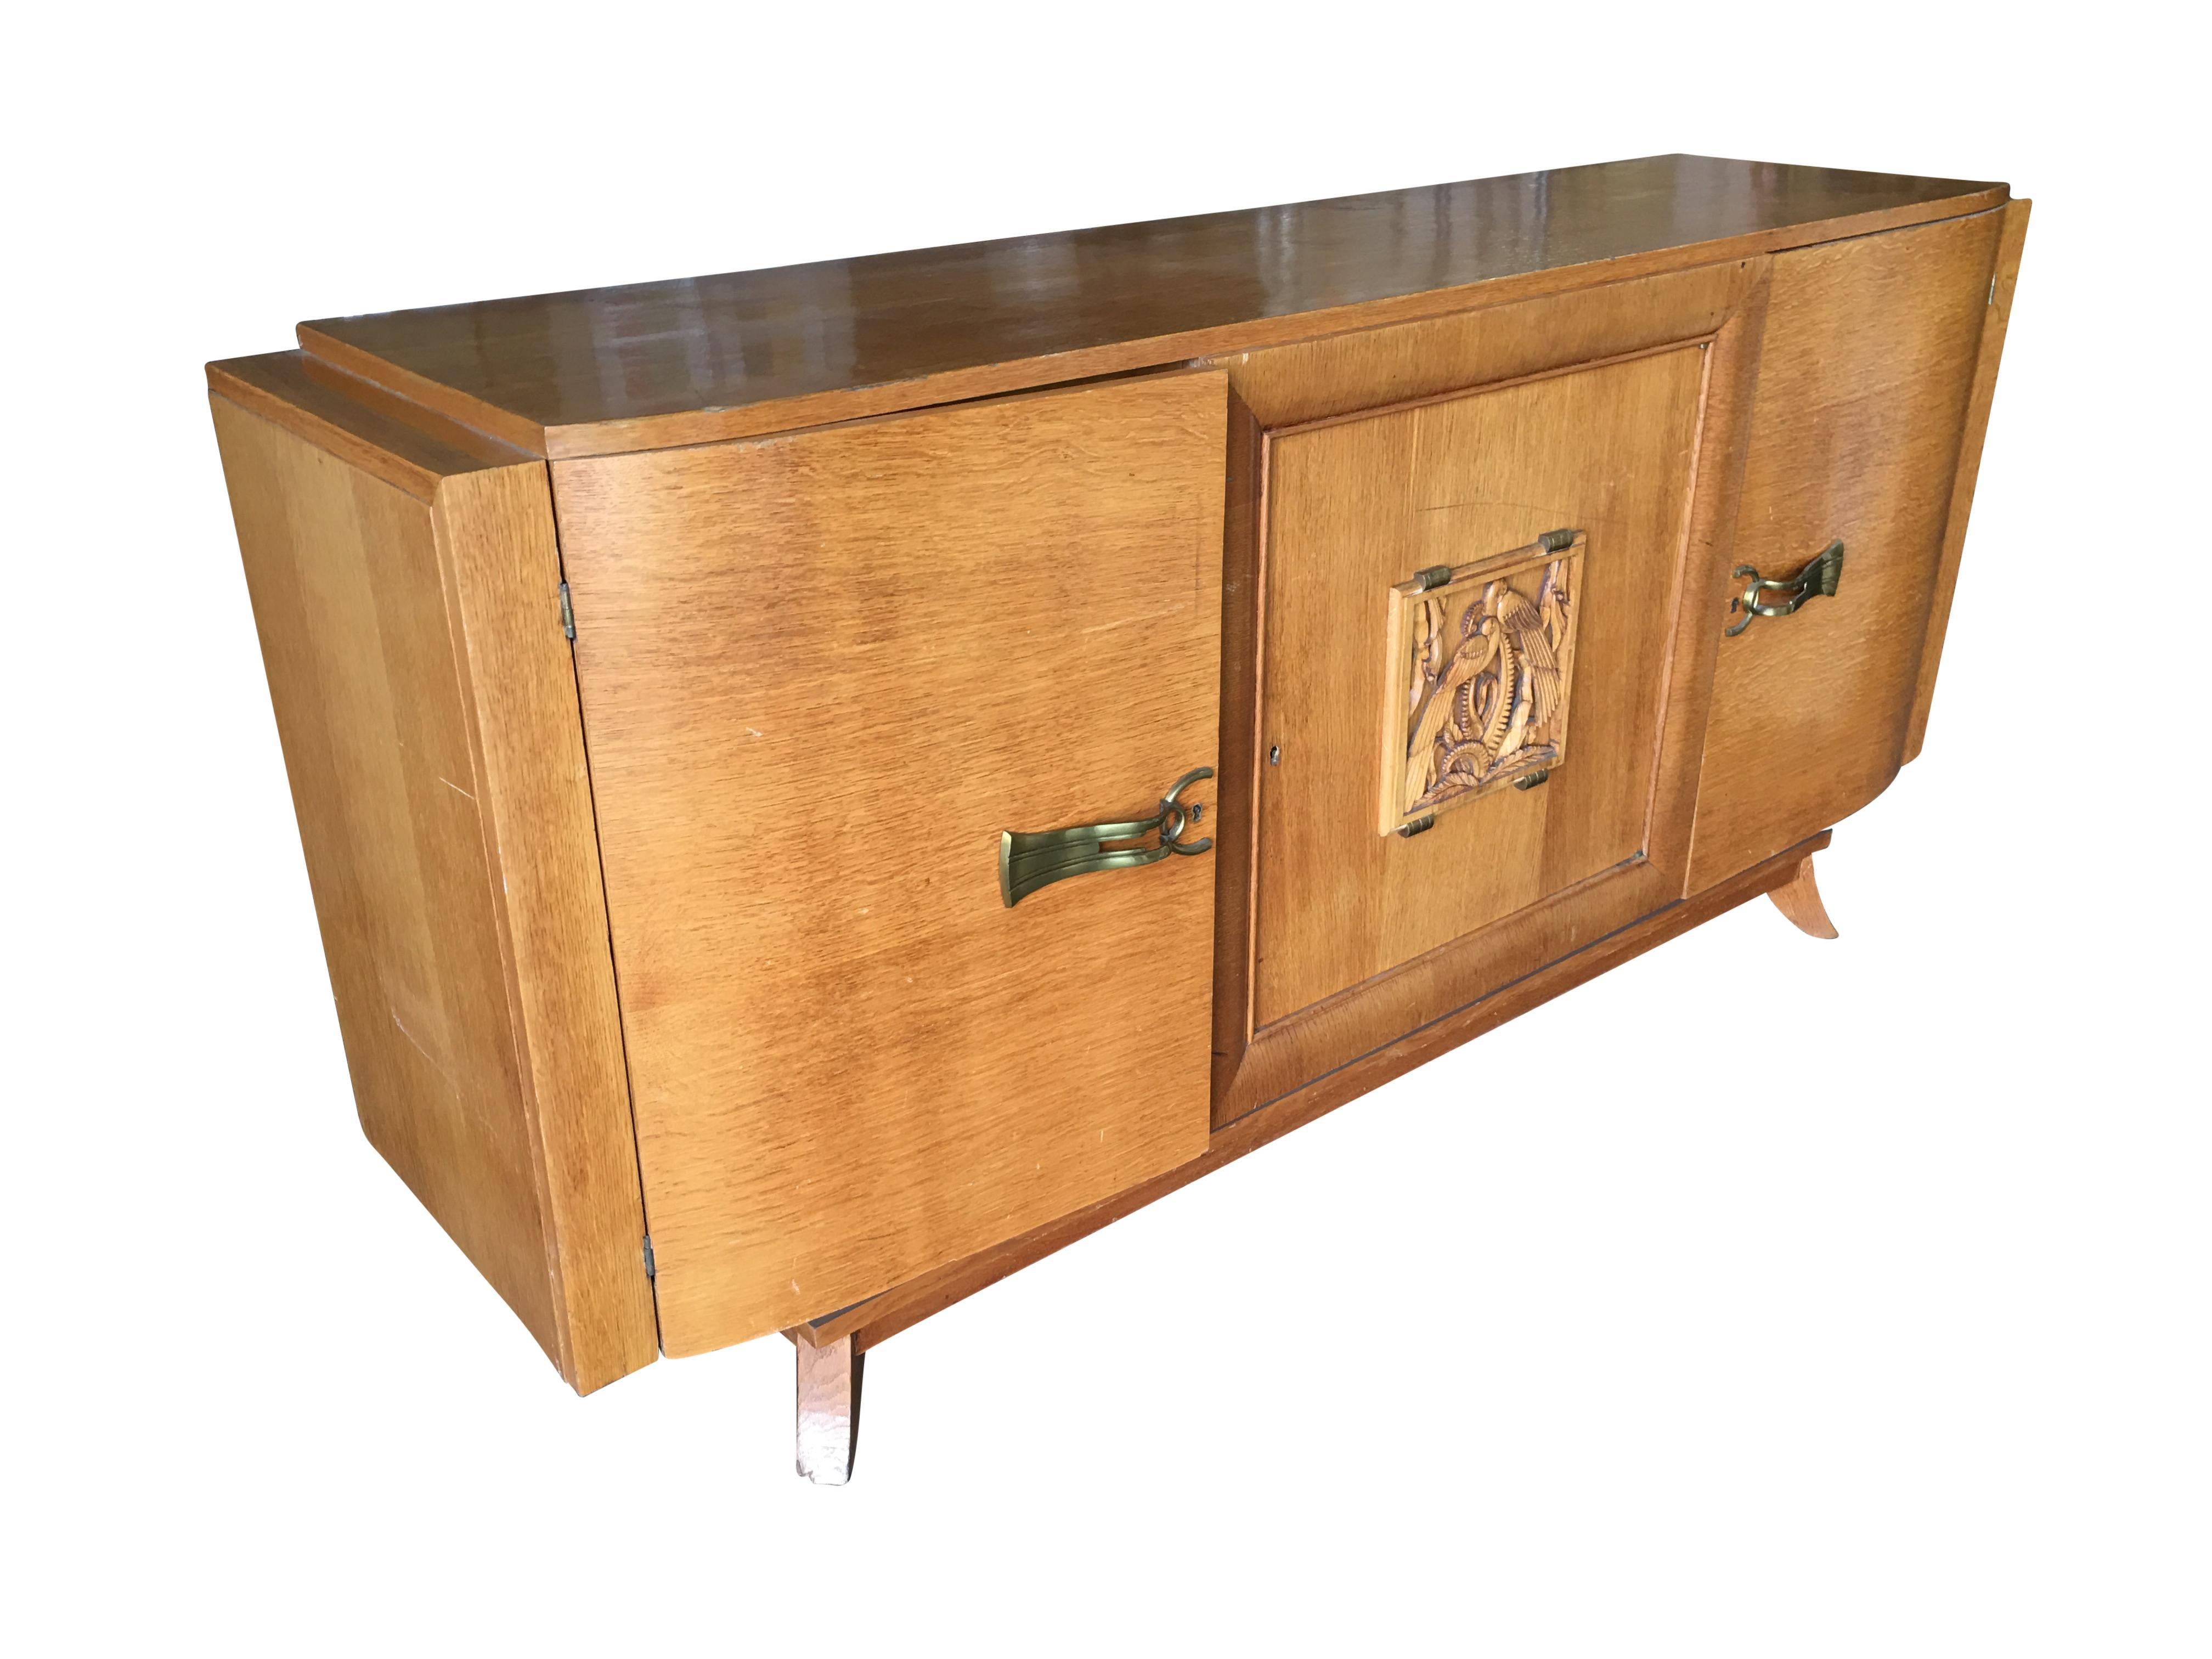 Early James Mont style 1940s midcentury era sideboard with hand carved East Asian art sculpture along the front.